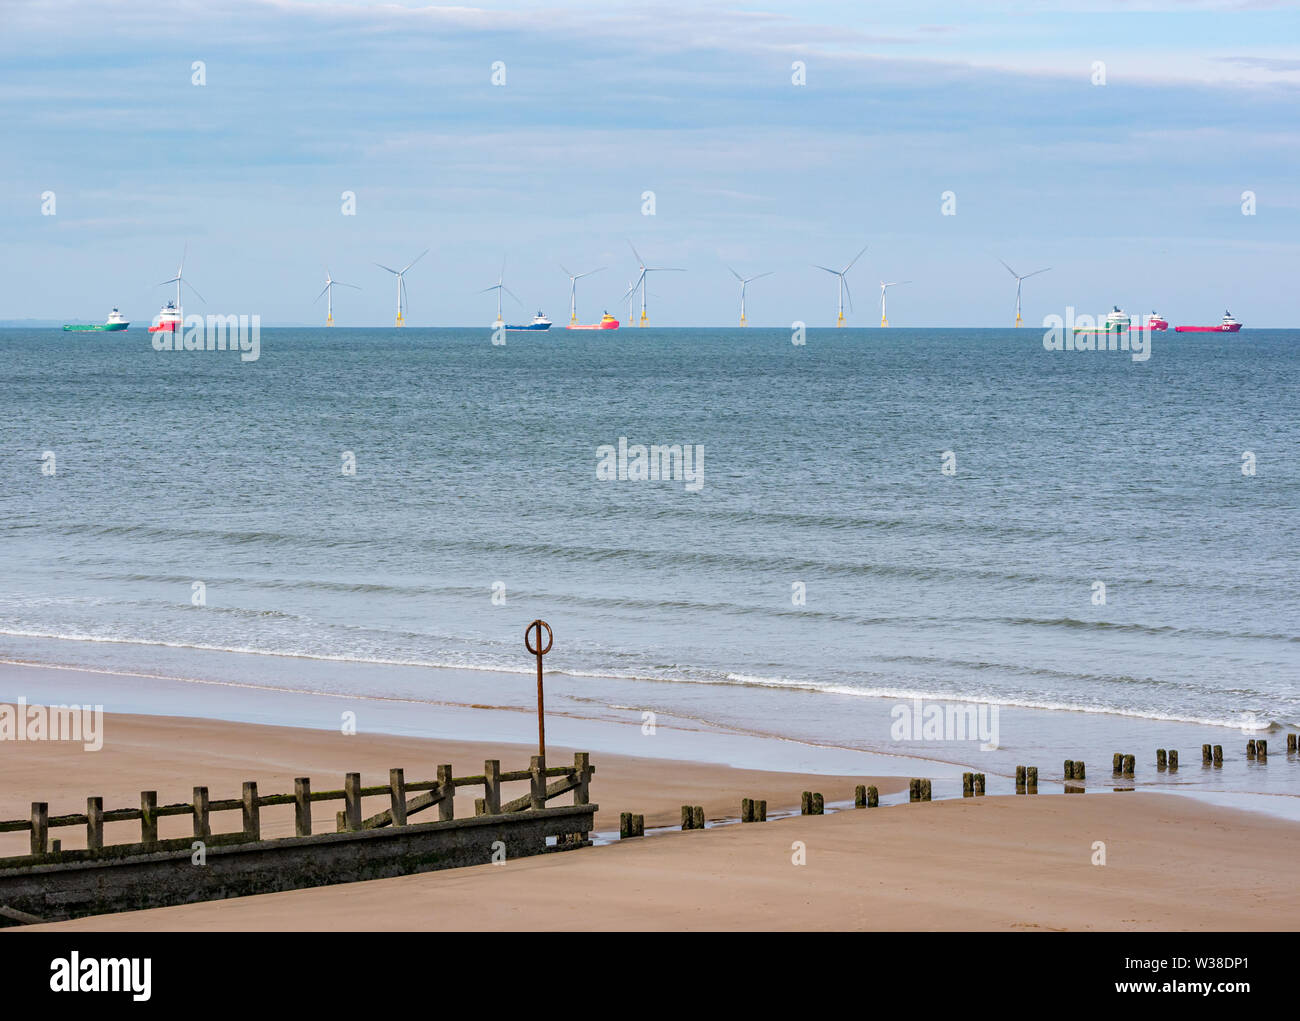 Offshore supply ships anchored by wind turbines in offshore windfarm, Aberdeen beach with groyne, Scotland, UK Stock Photo